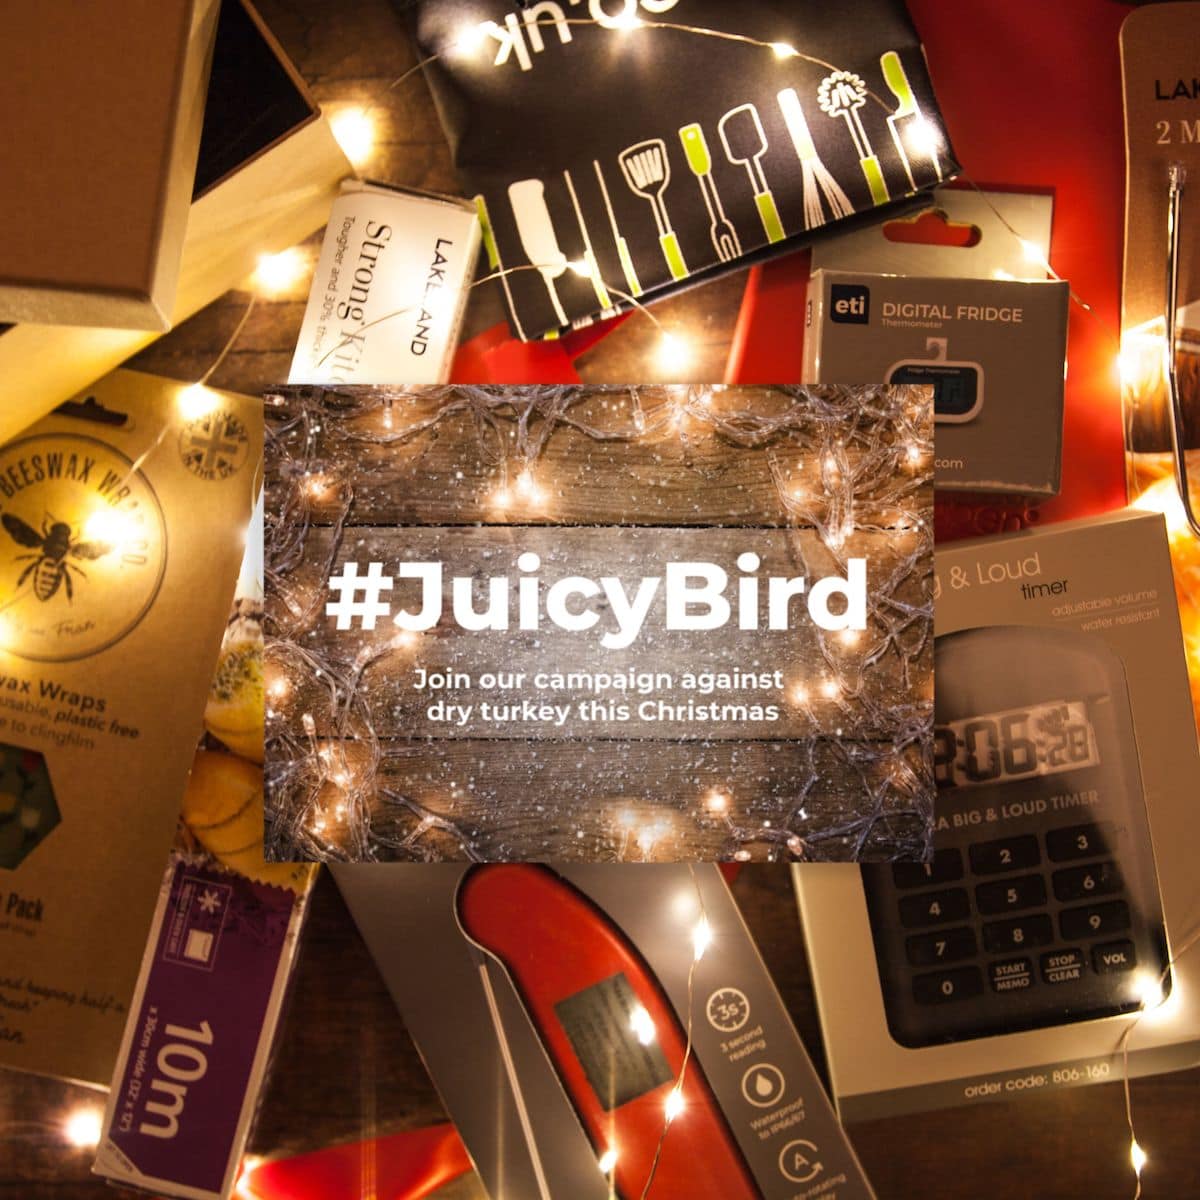 The prize items, with text overlay #JuicyBird